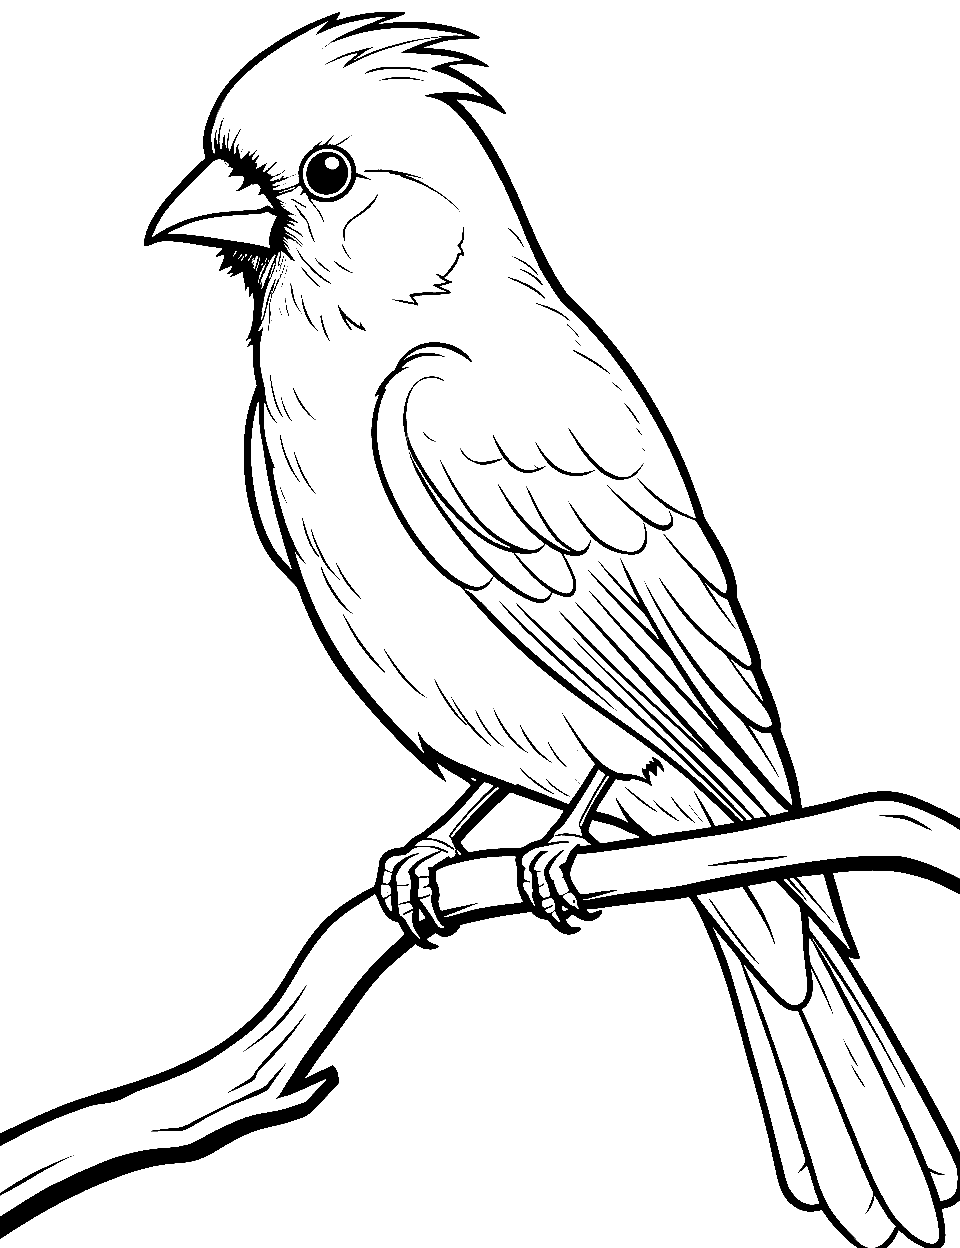 Simple Cardinal Drawing Coloring Page - A basic design of a cardinal ideal for novice colorists.